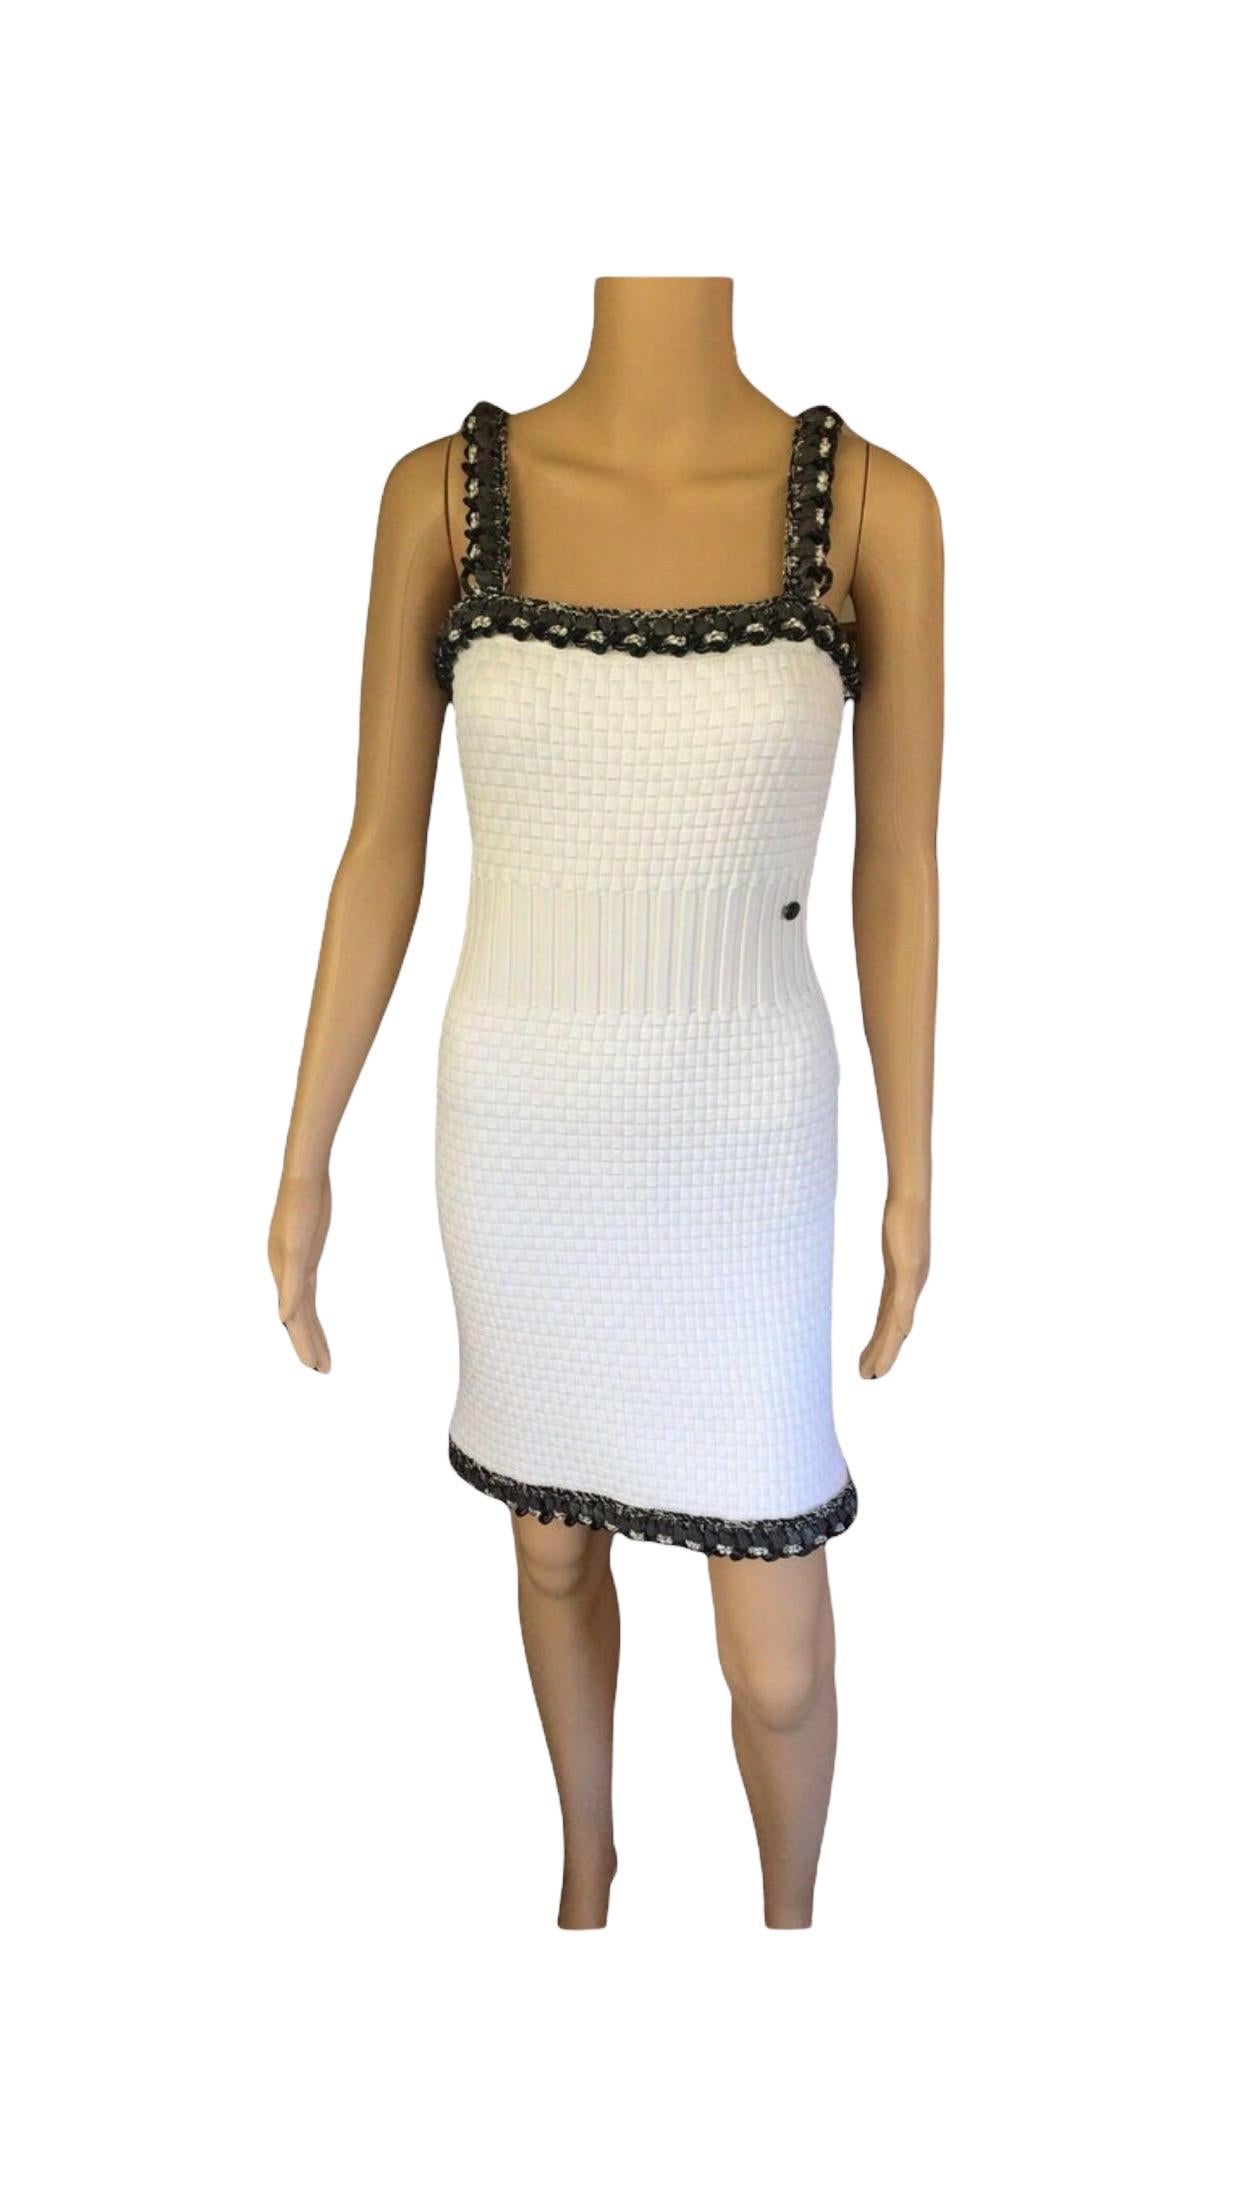 New Chanel S/S 2014 Runway Knit Chain Embellished Trim White Mini Dress For Sale 2